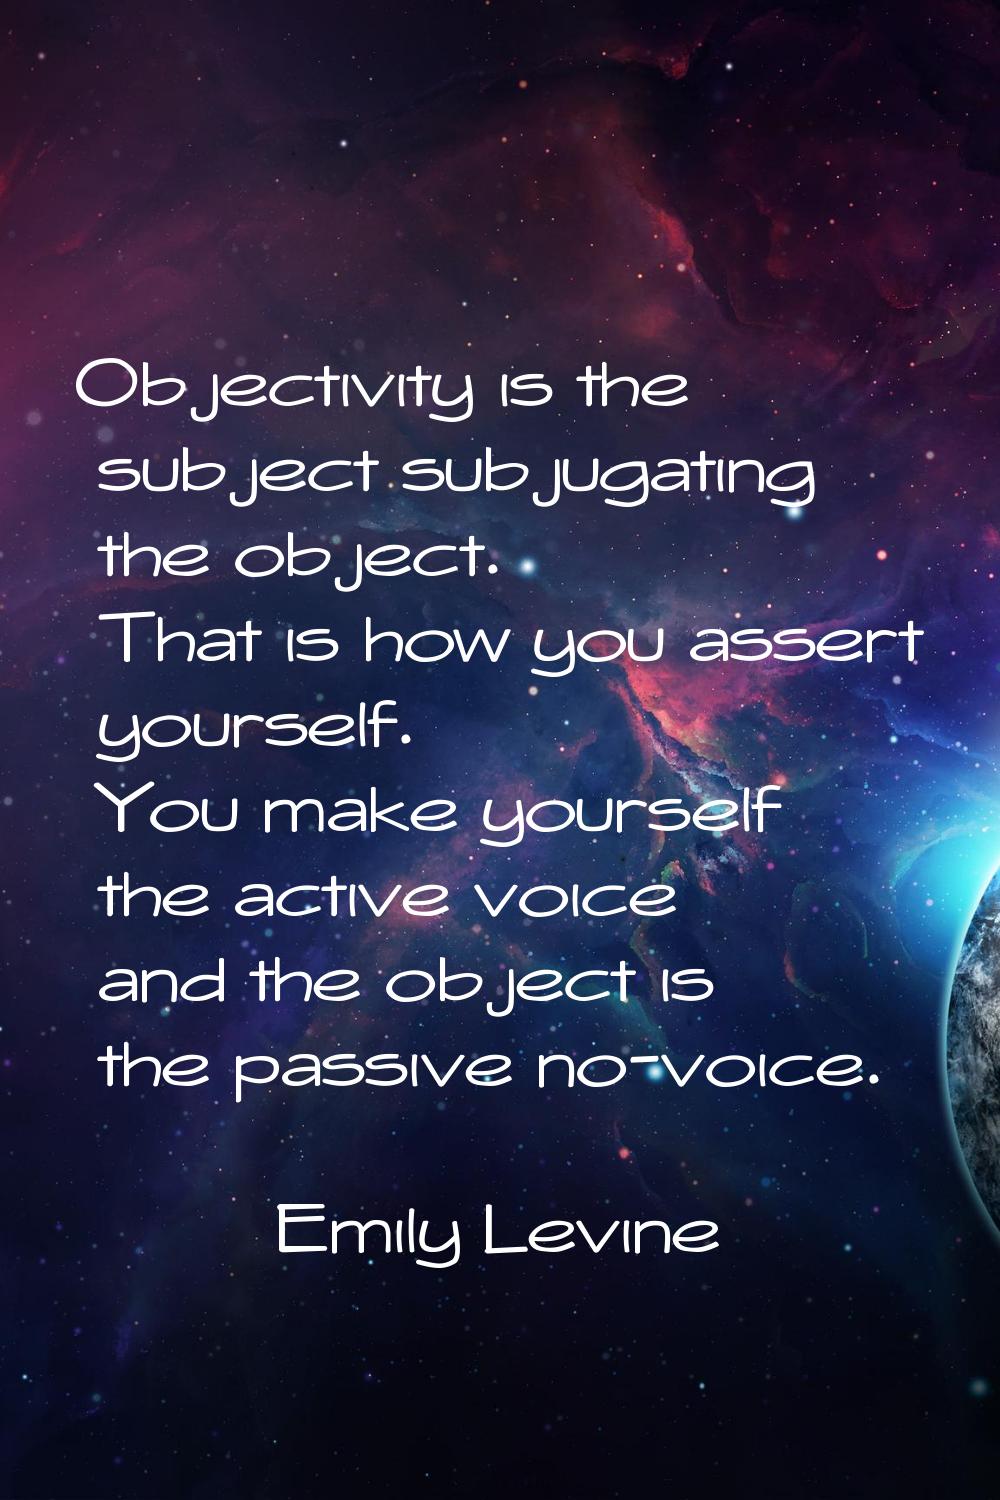 Objectivity is the subject subjugating the object. That is how you assert yourself. You make yourse